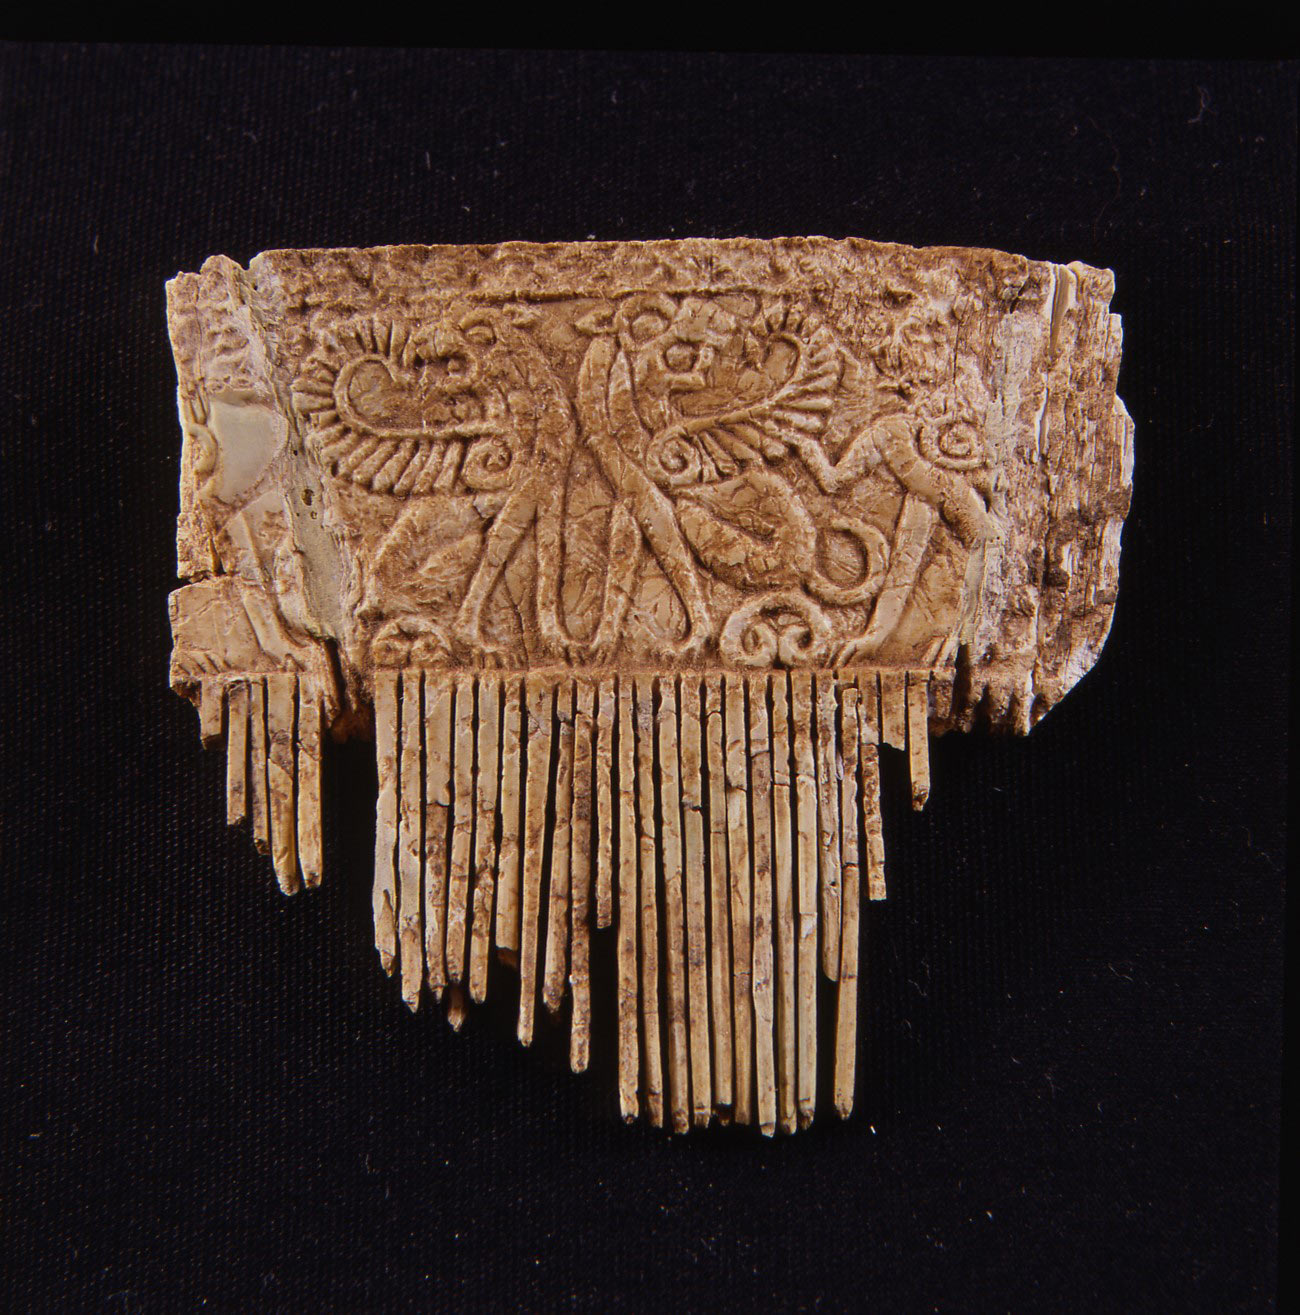 Ivory comb with winged lions from the Poggione necropolis